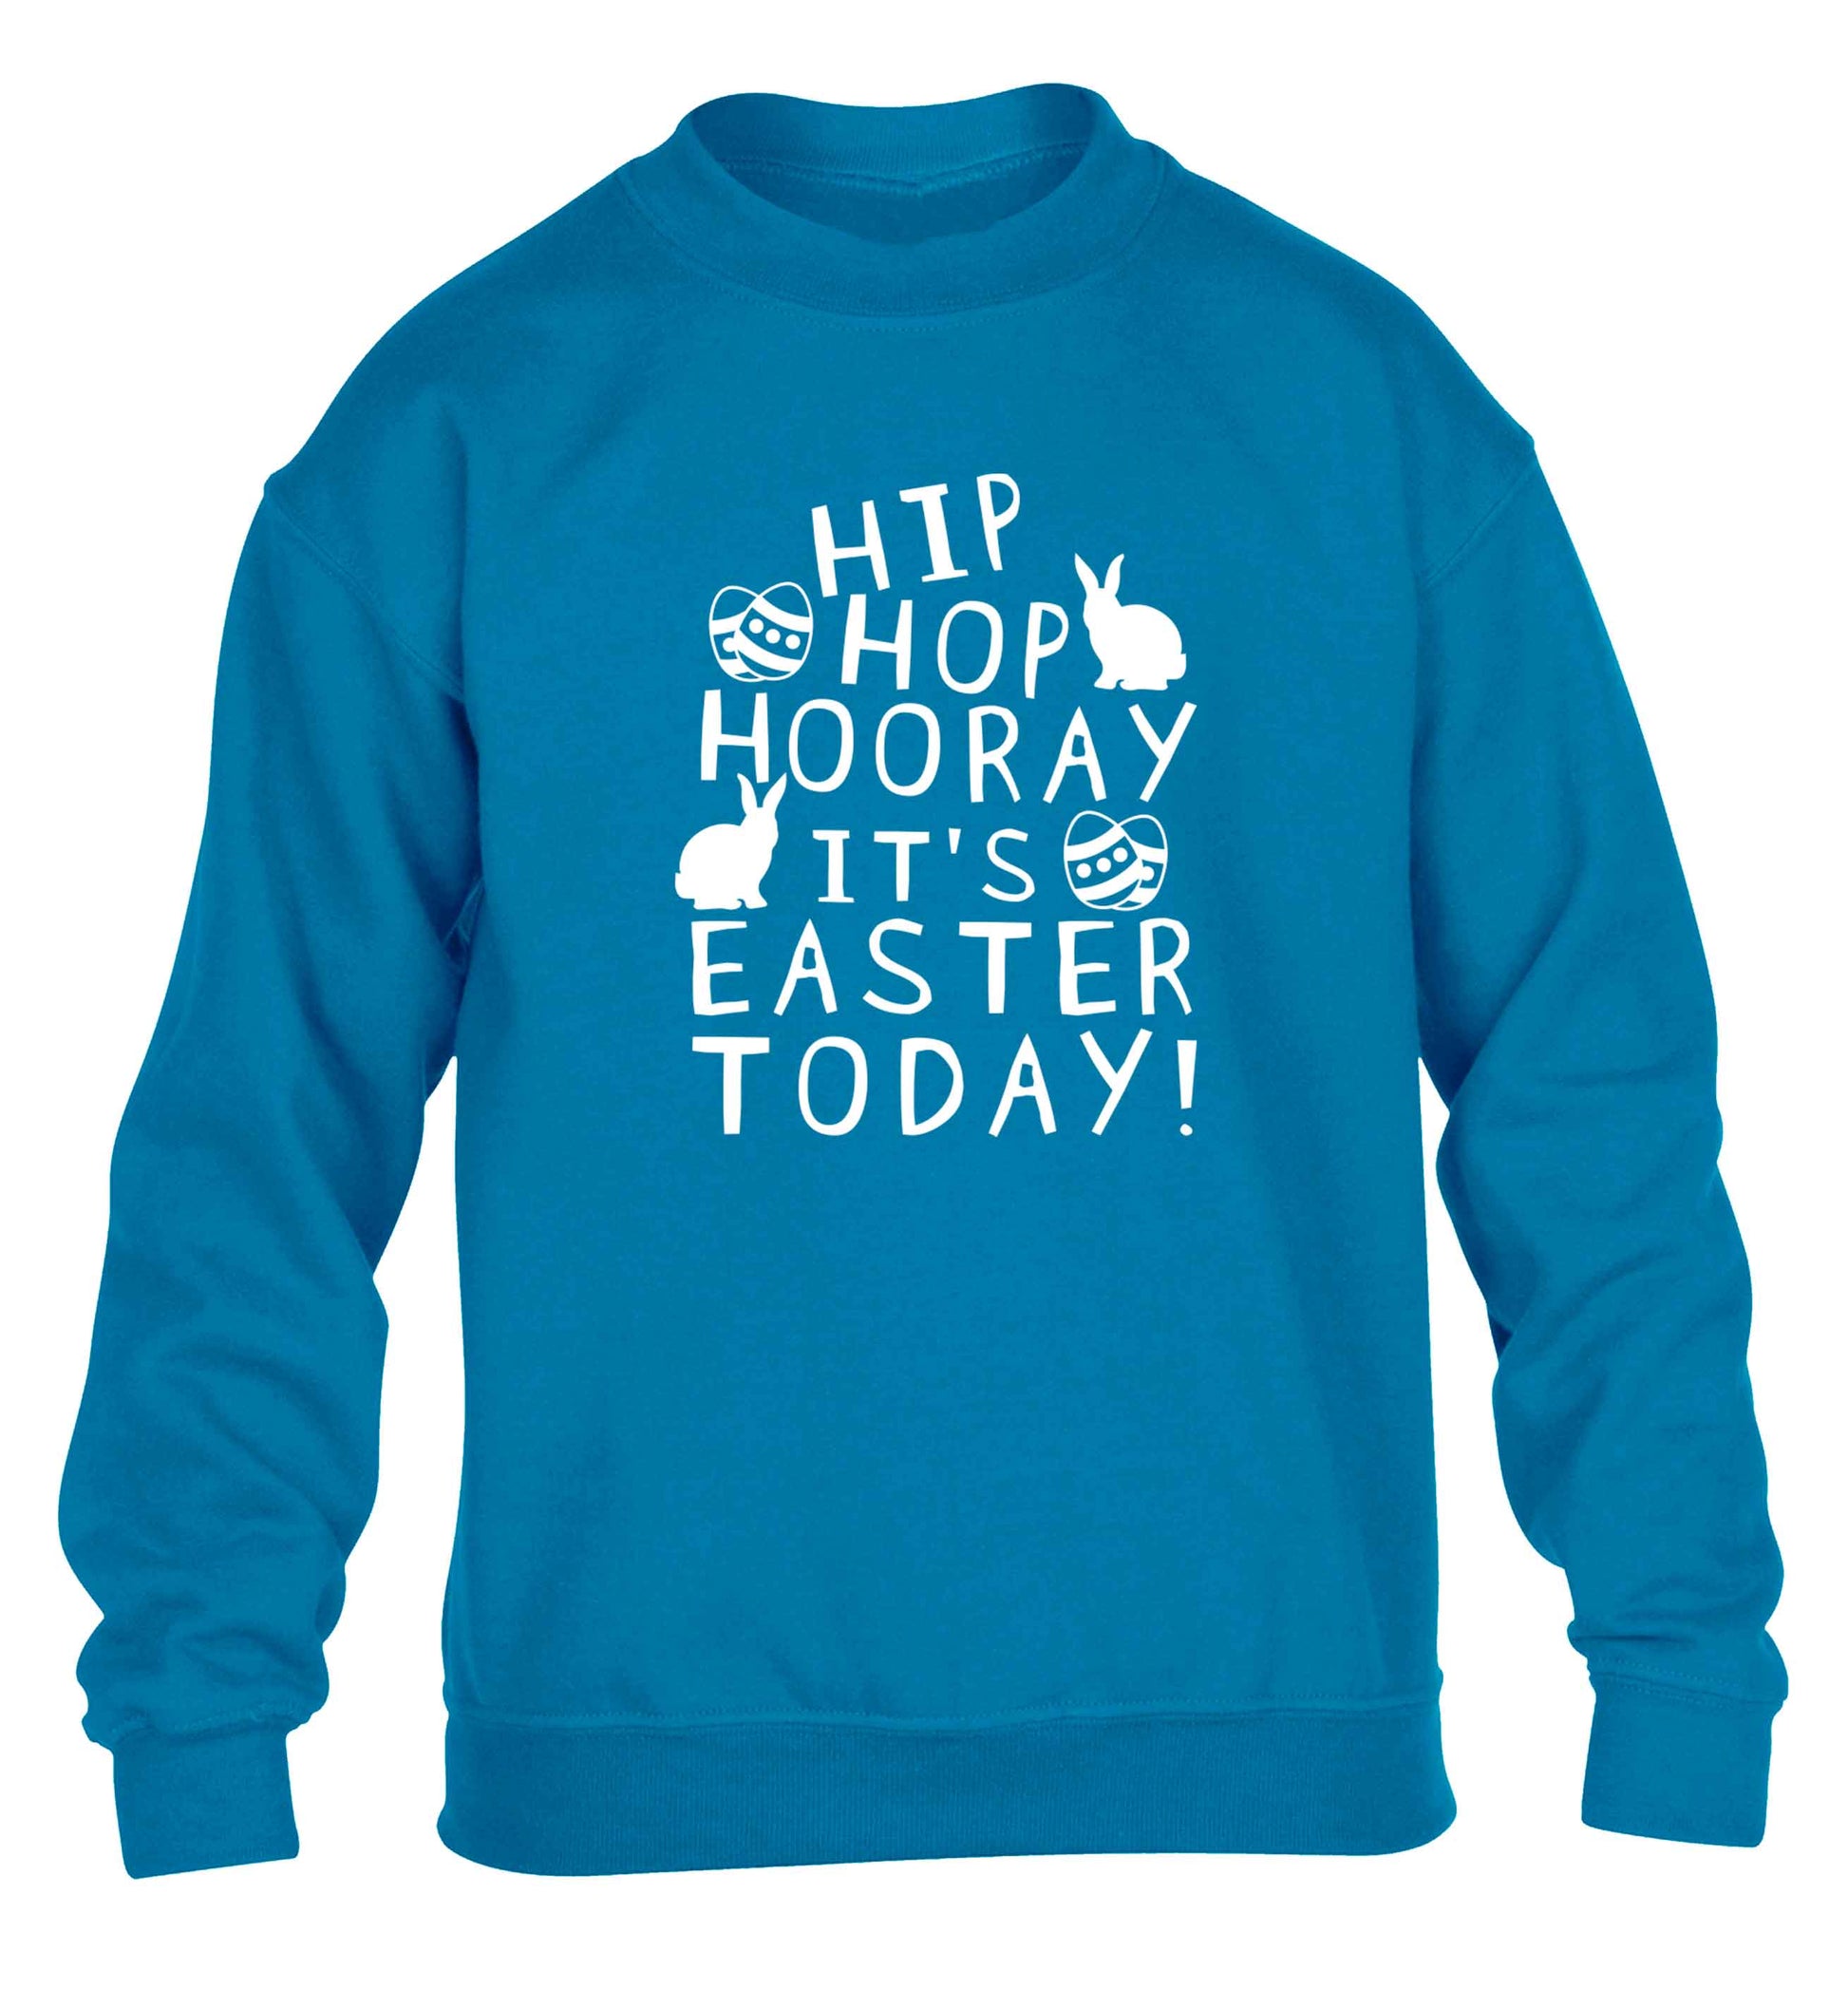 Hip hip hooray it's Easter today! children's blue sweater 12-13 Years